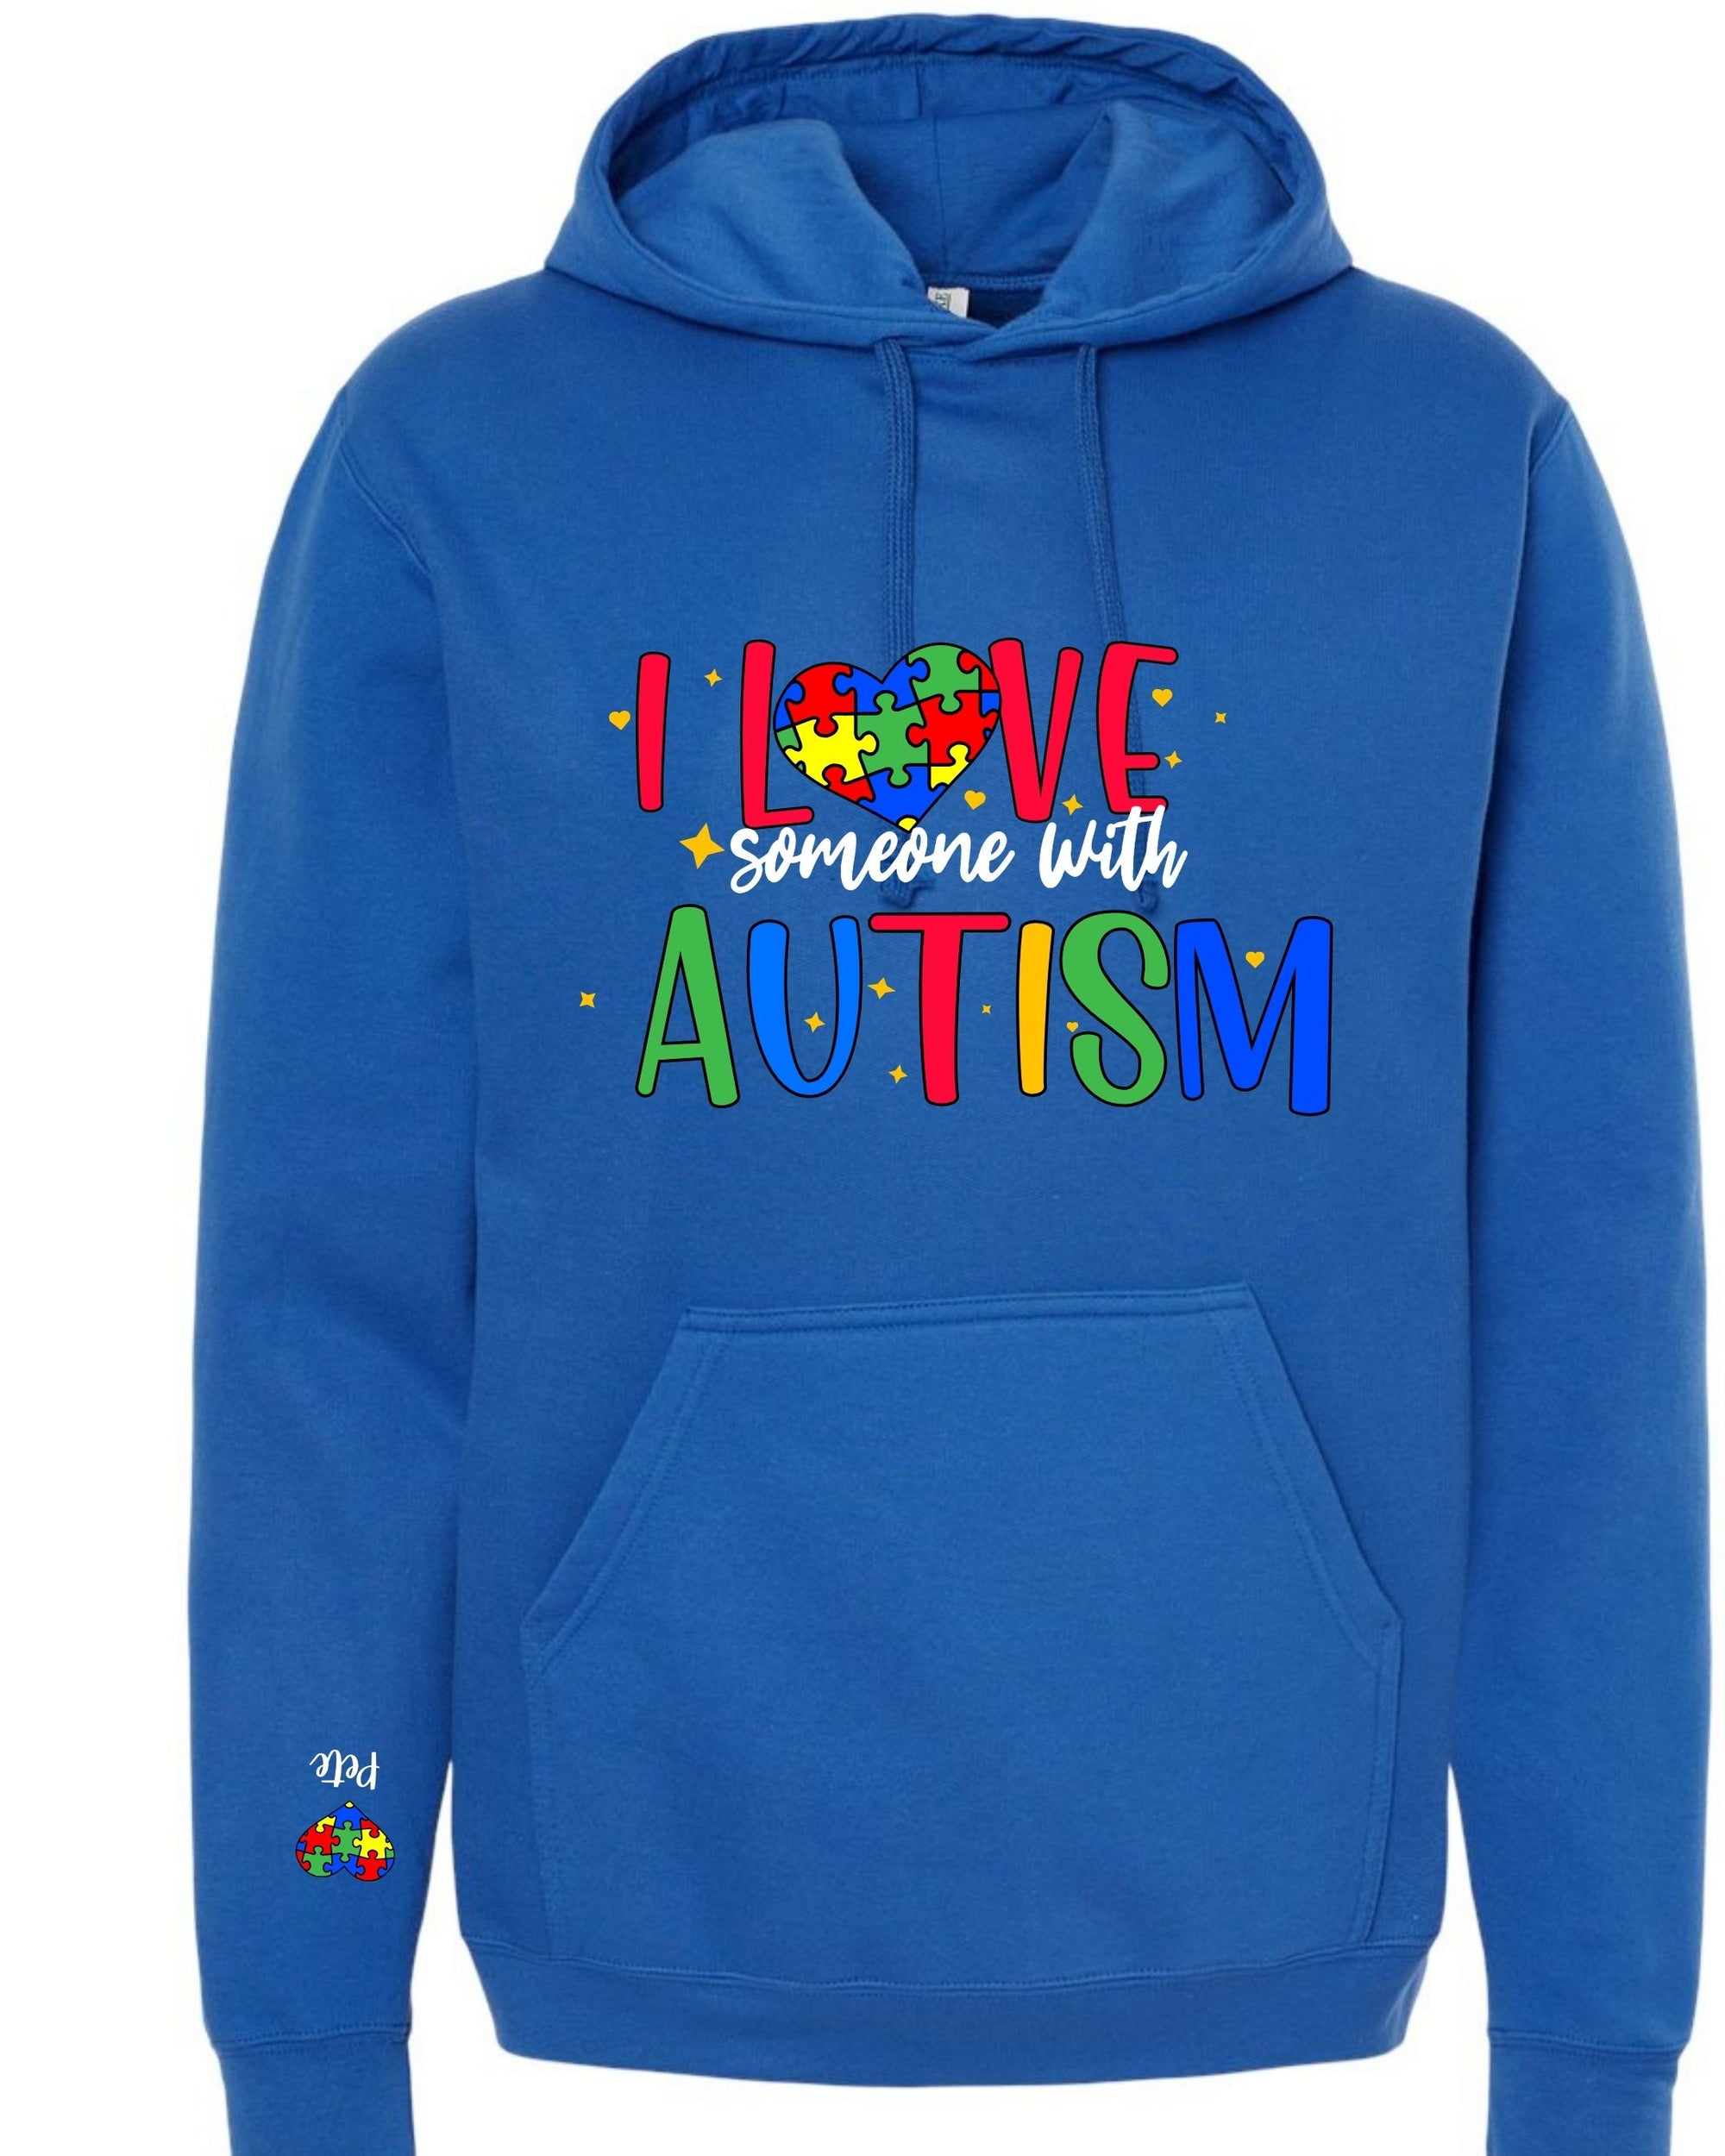 I love someone with autism  hoodie - adult